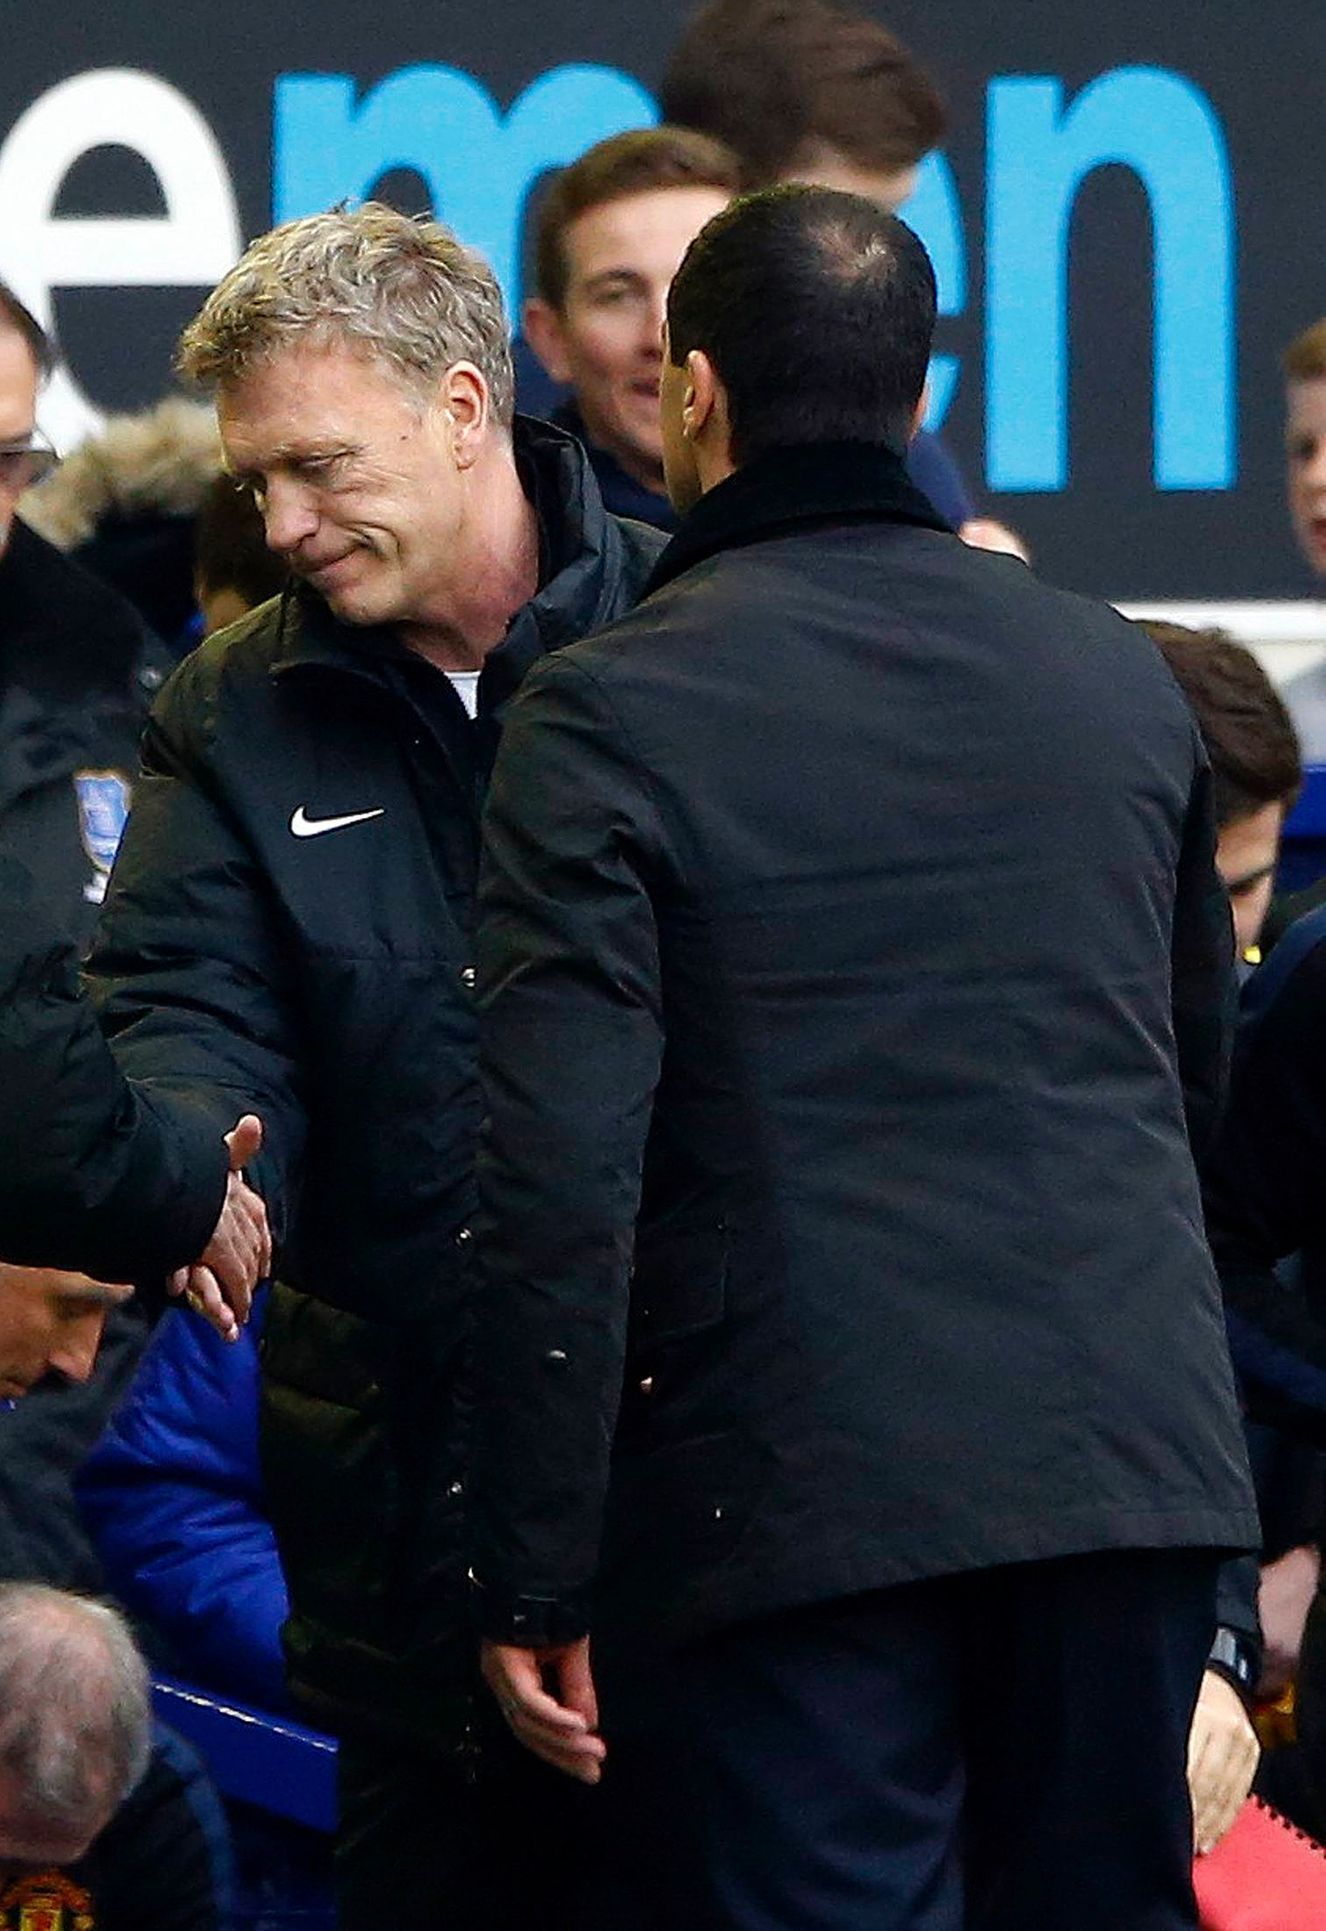 Everton manager Roberto Martínez shakes hands with Manchester United manager David Moyes after their English Premier League soccer match in Liverpool